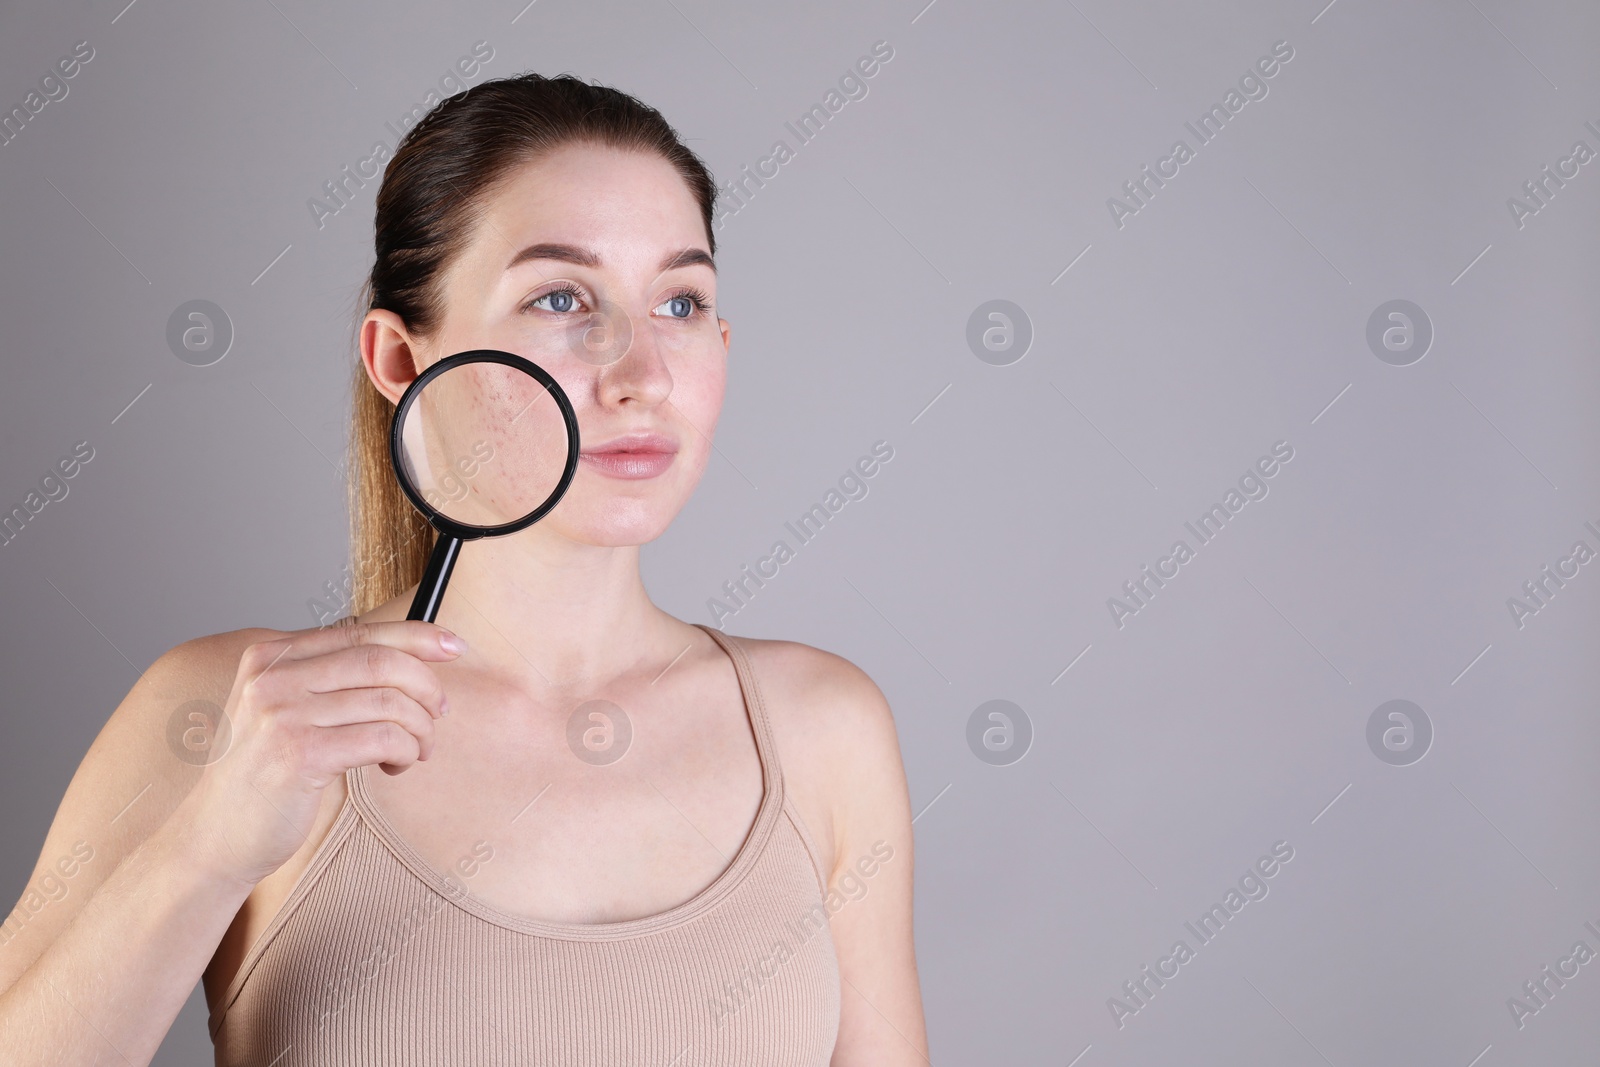 Photo of Young woman with acne problem holding magnifying glass near her skin on light grey background. Space for text